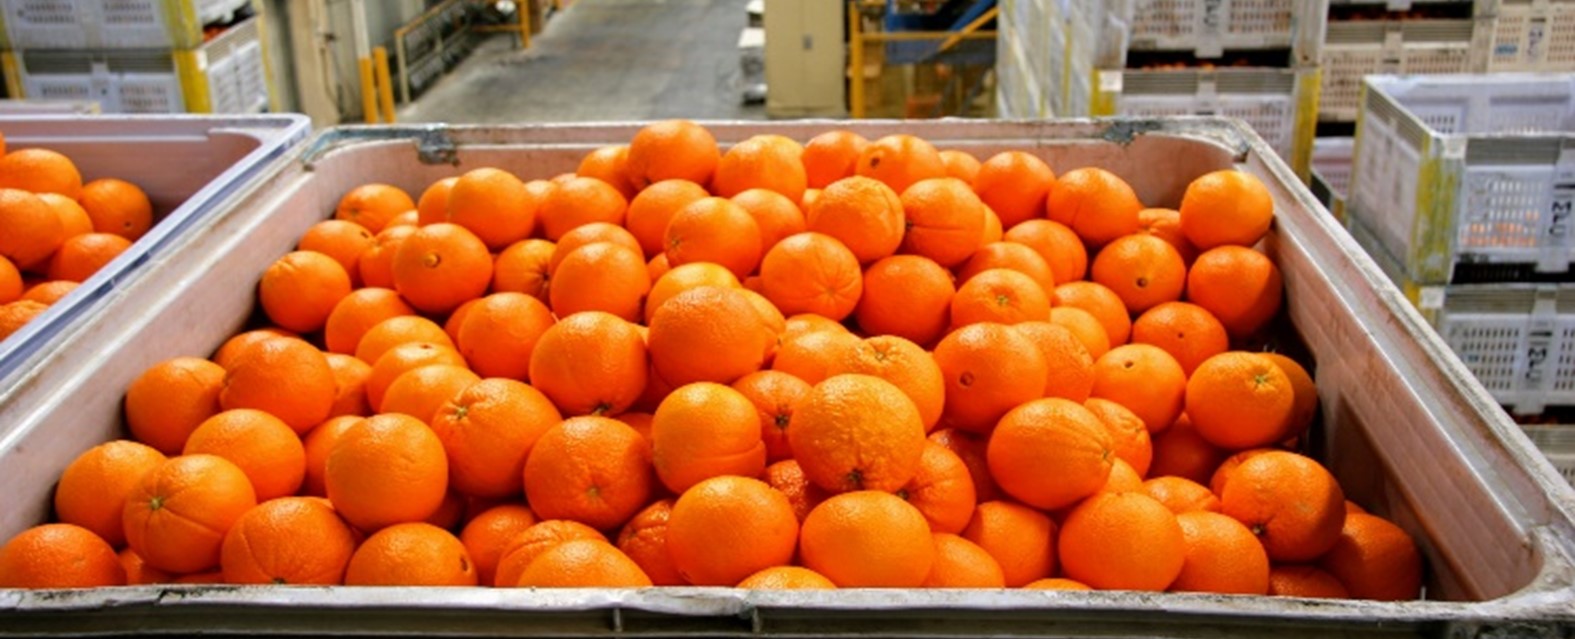 Close up image of crated oranges ready for market.